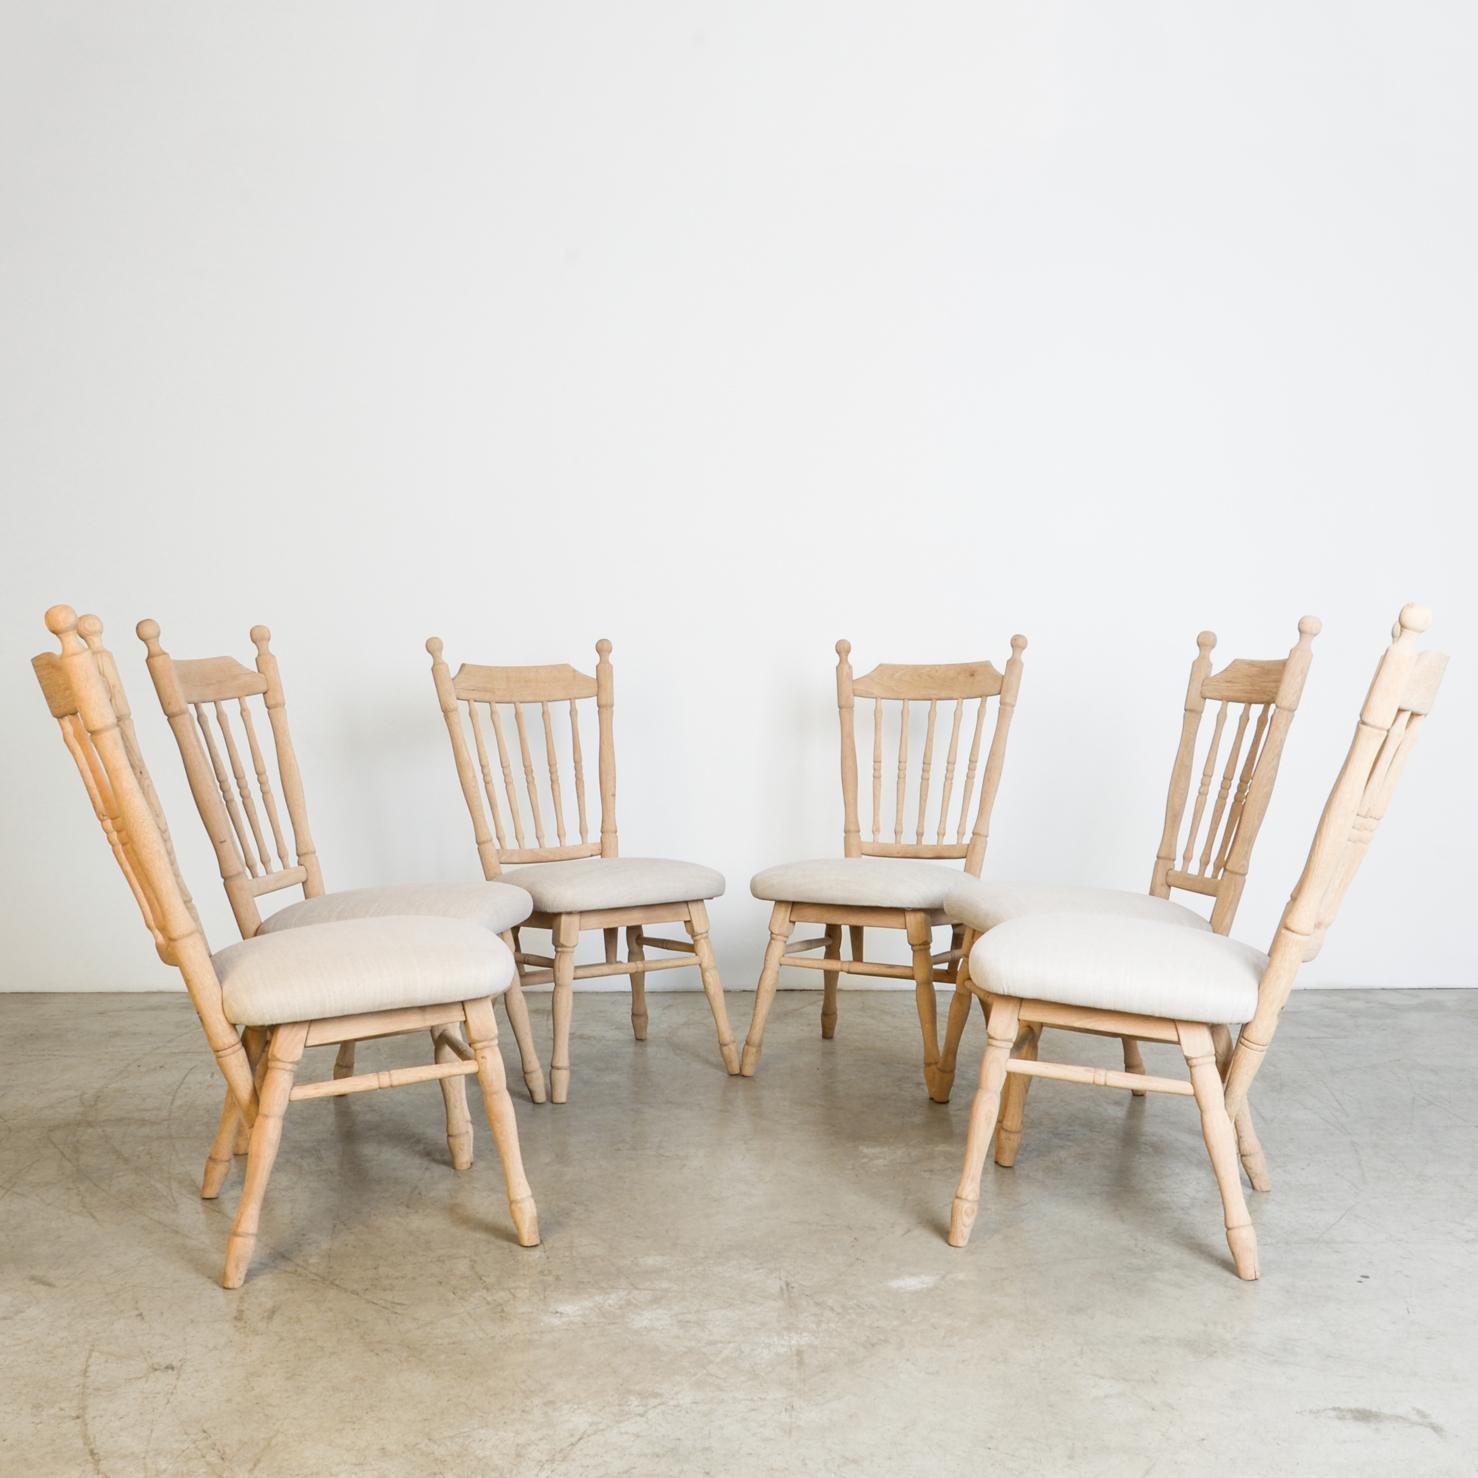 From circa 1950 Belgium, these sturdy oak chairs are influenced by classical furniture styles, seen through a simplified, mid-20th century lens. A casual country shape is composed of decorative turned spindles and formal legs in late rendition of